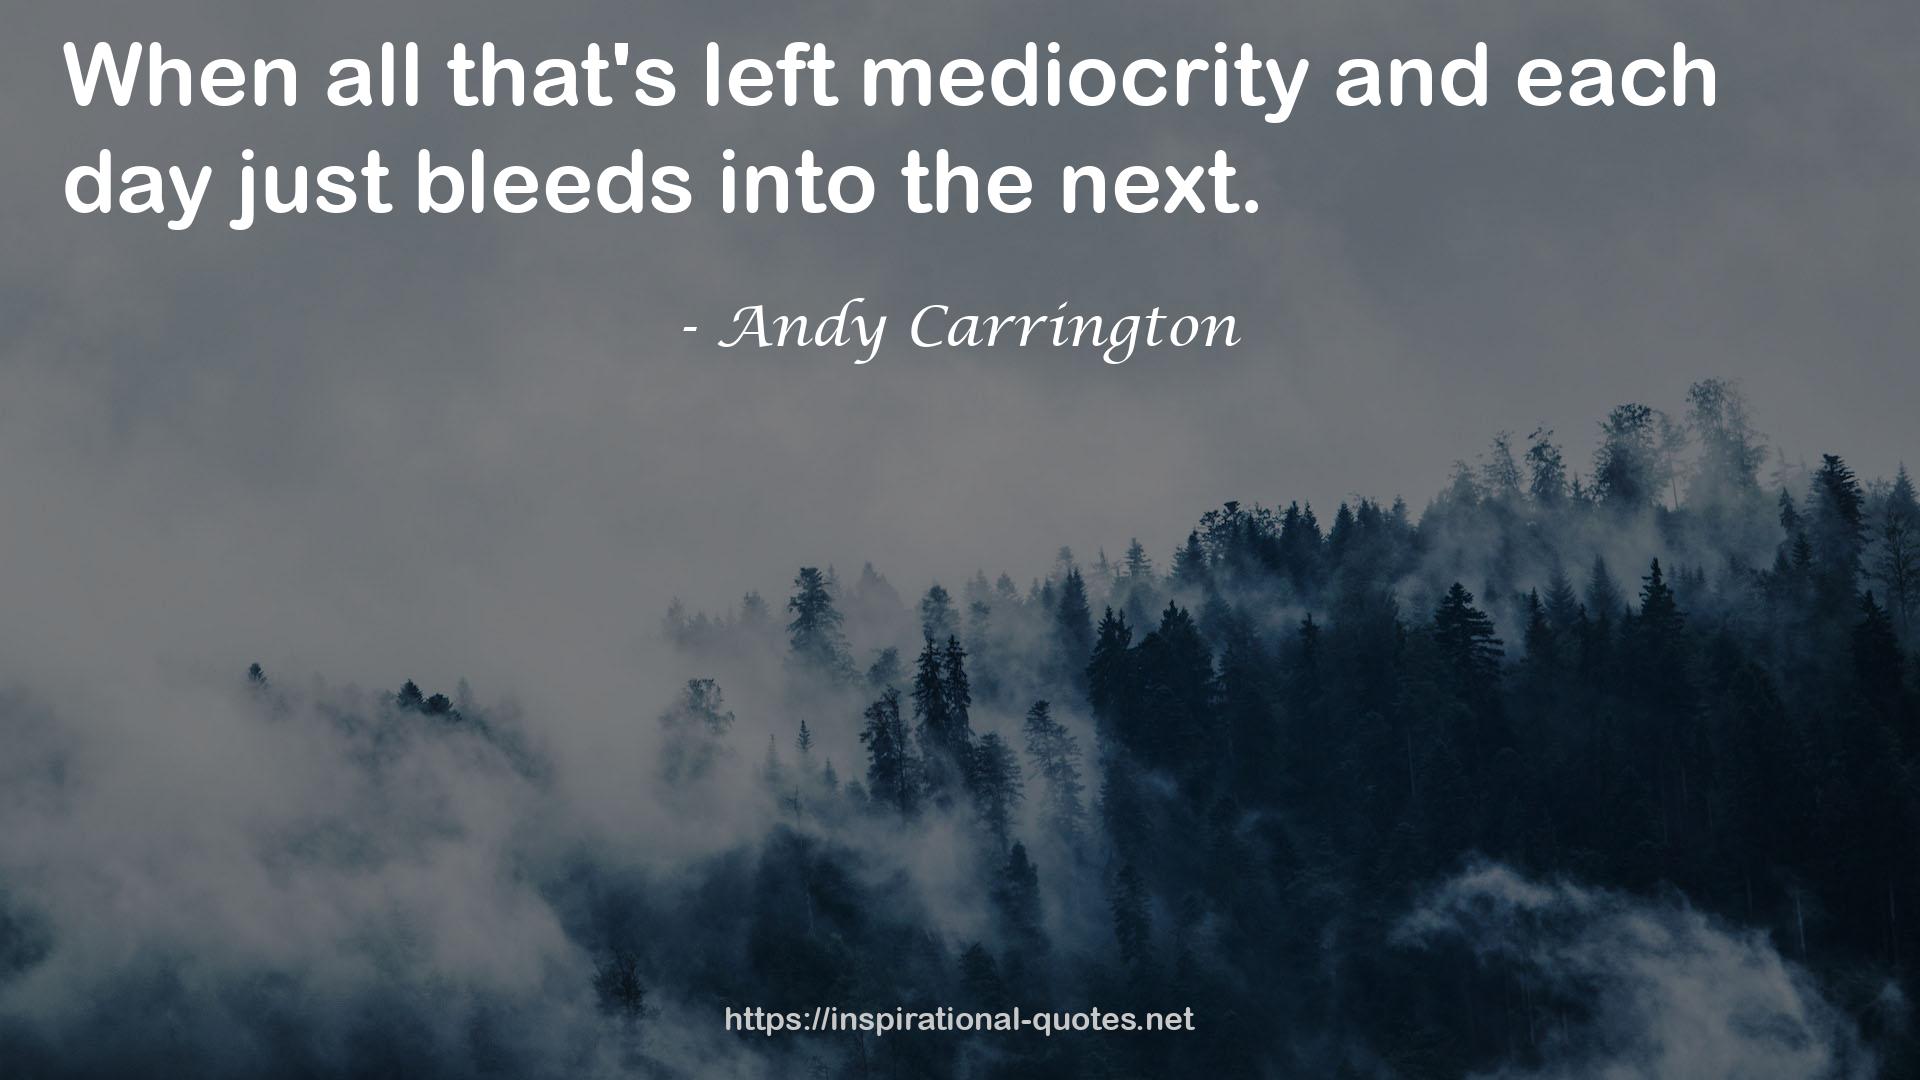 Andy Carrington QUOTES